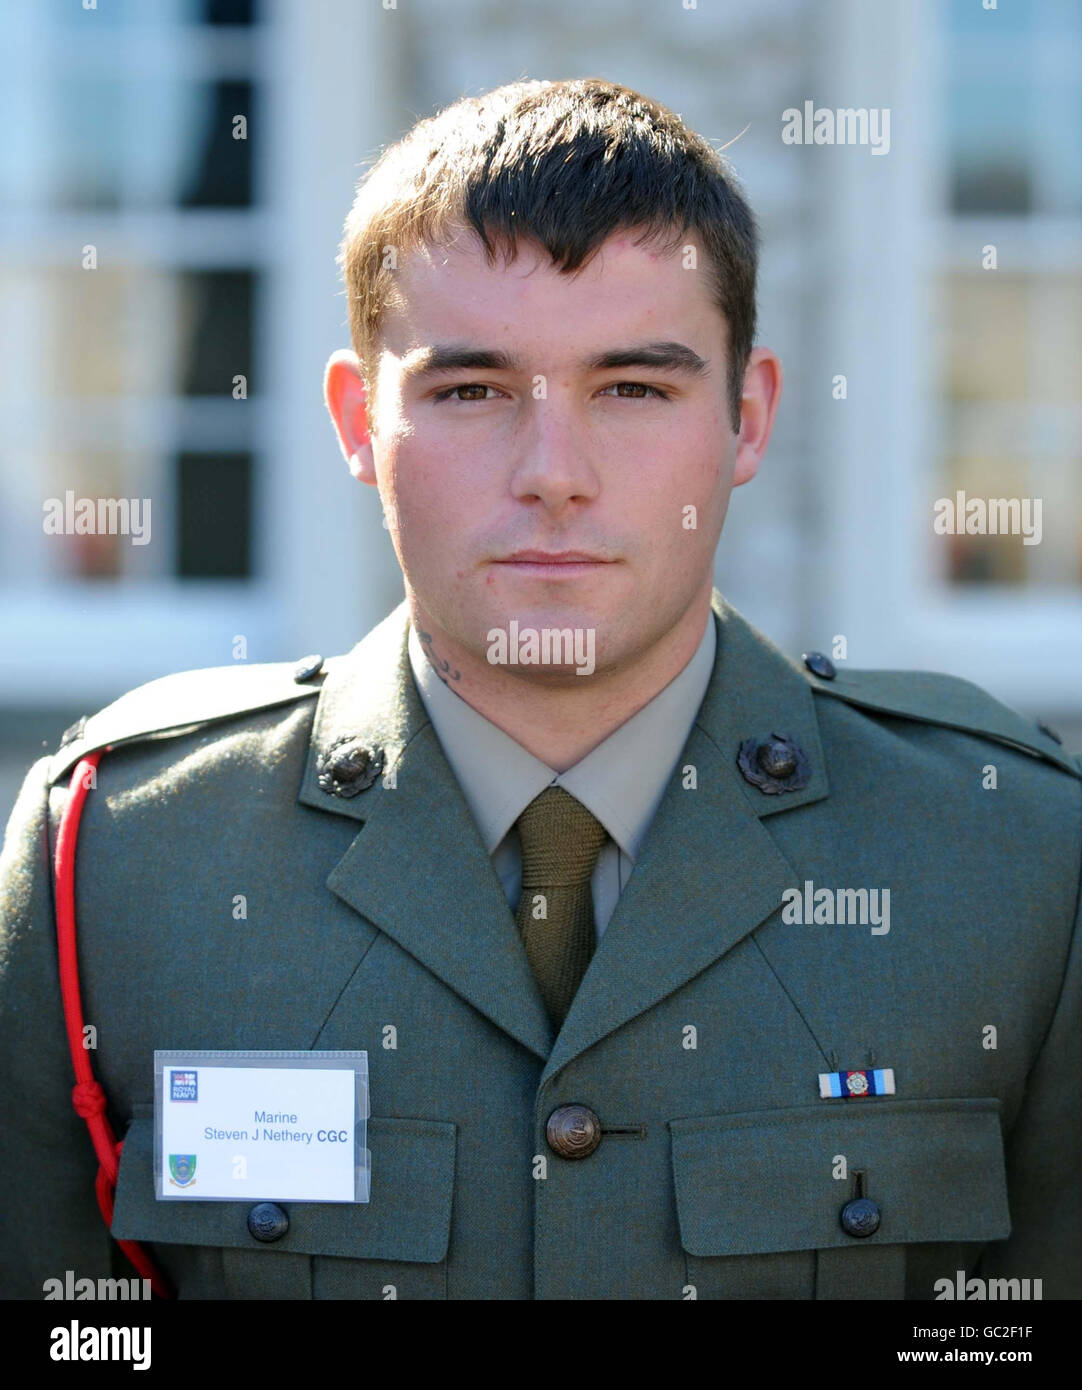 Marine Steven Nethery, 23, who was awarded the Conspicuous Gallantry Cross in the latest Operational Honours and Awards list during a ceremony in Royal Marines Stonehoue in Plymouth. Stock Photo